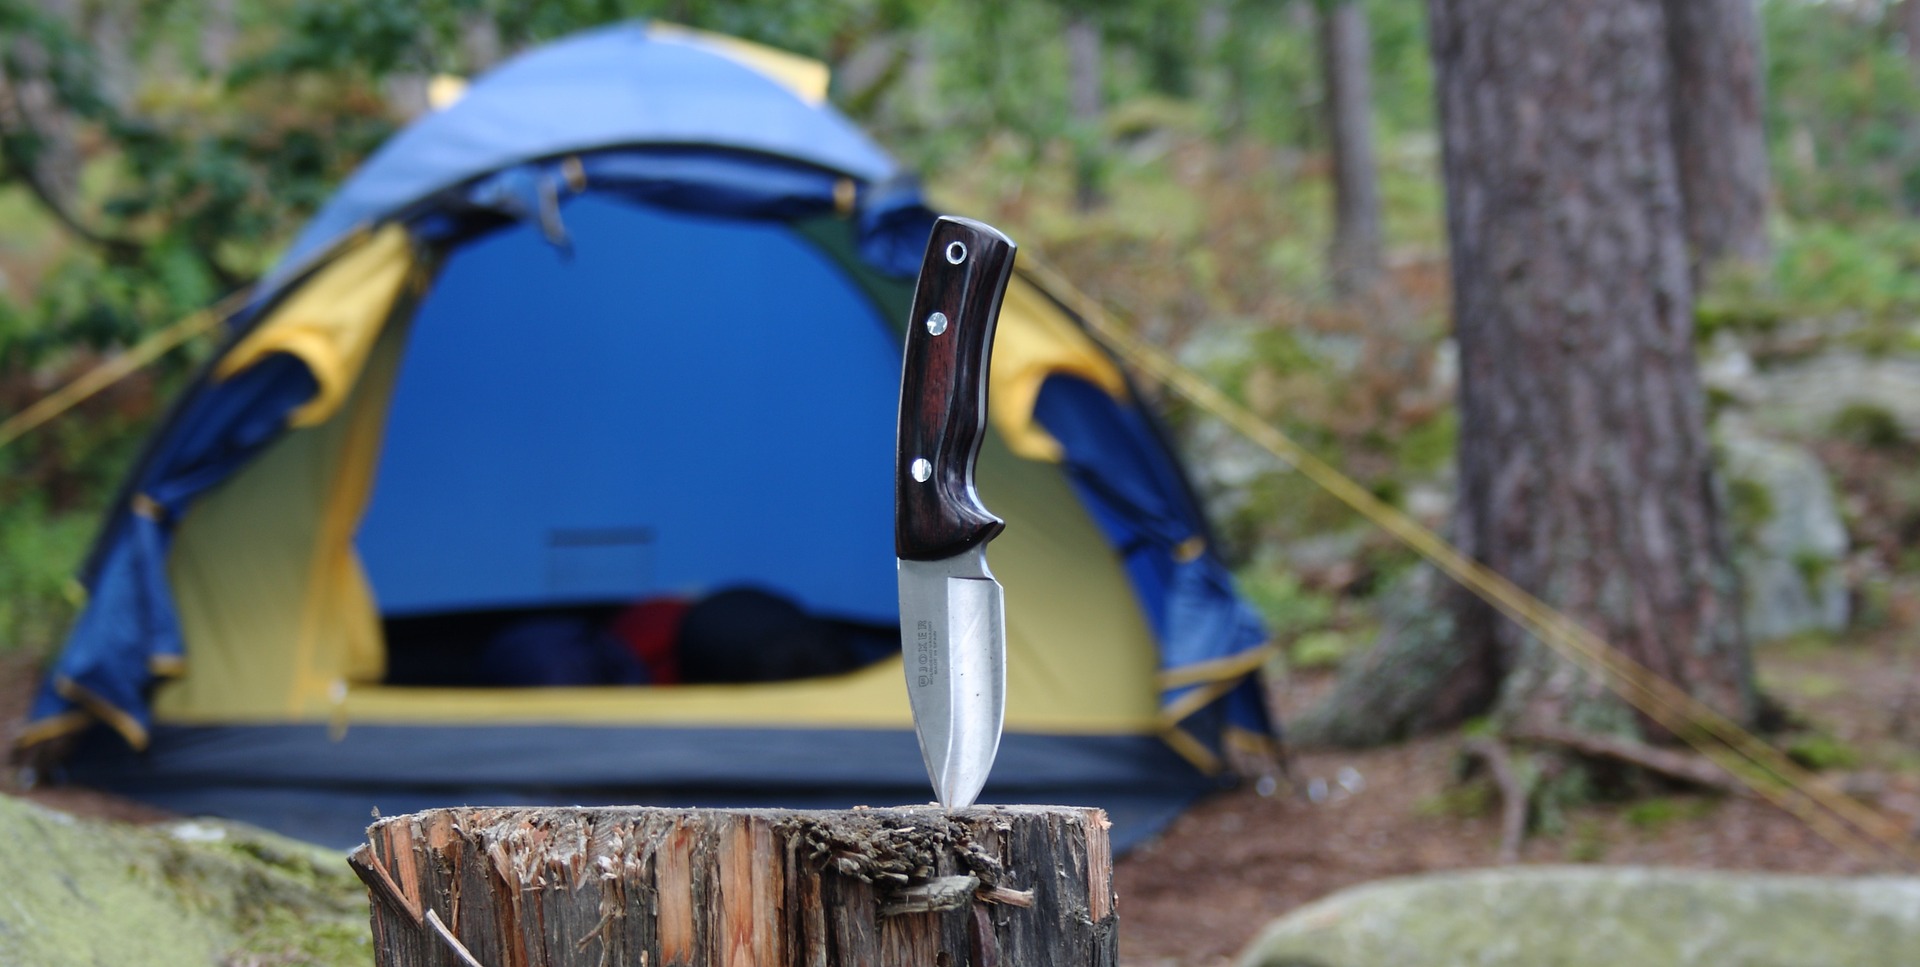 How to Pick the Best Camping Knife